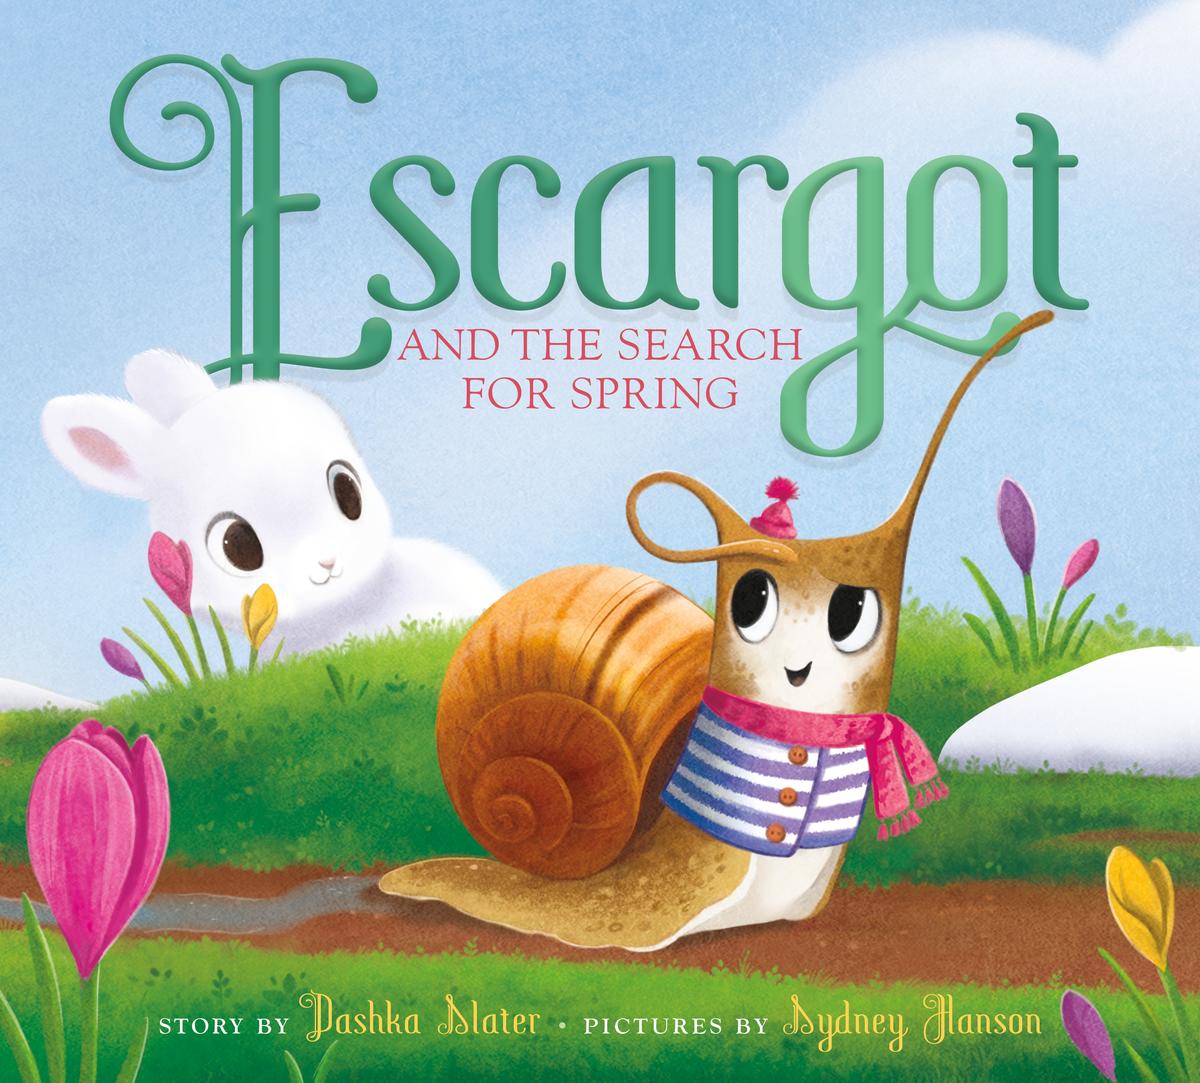 Escargot and the Search for Spring - 